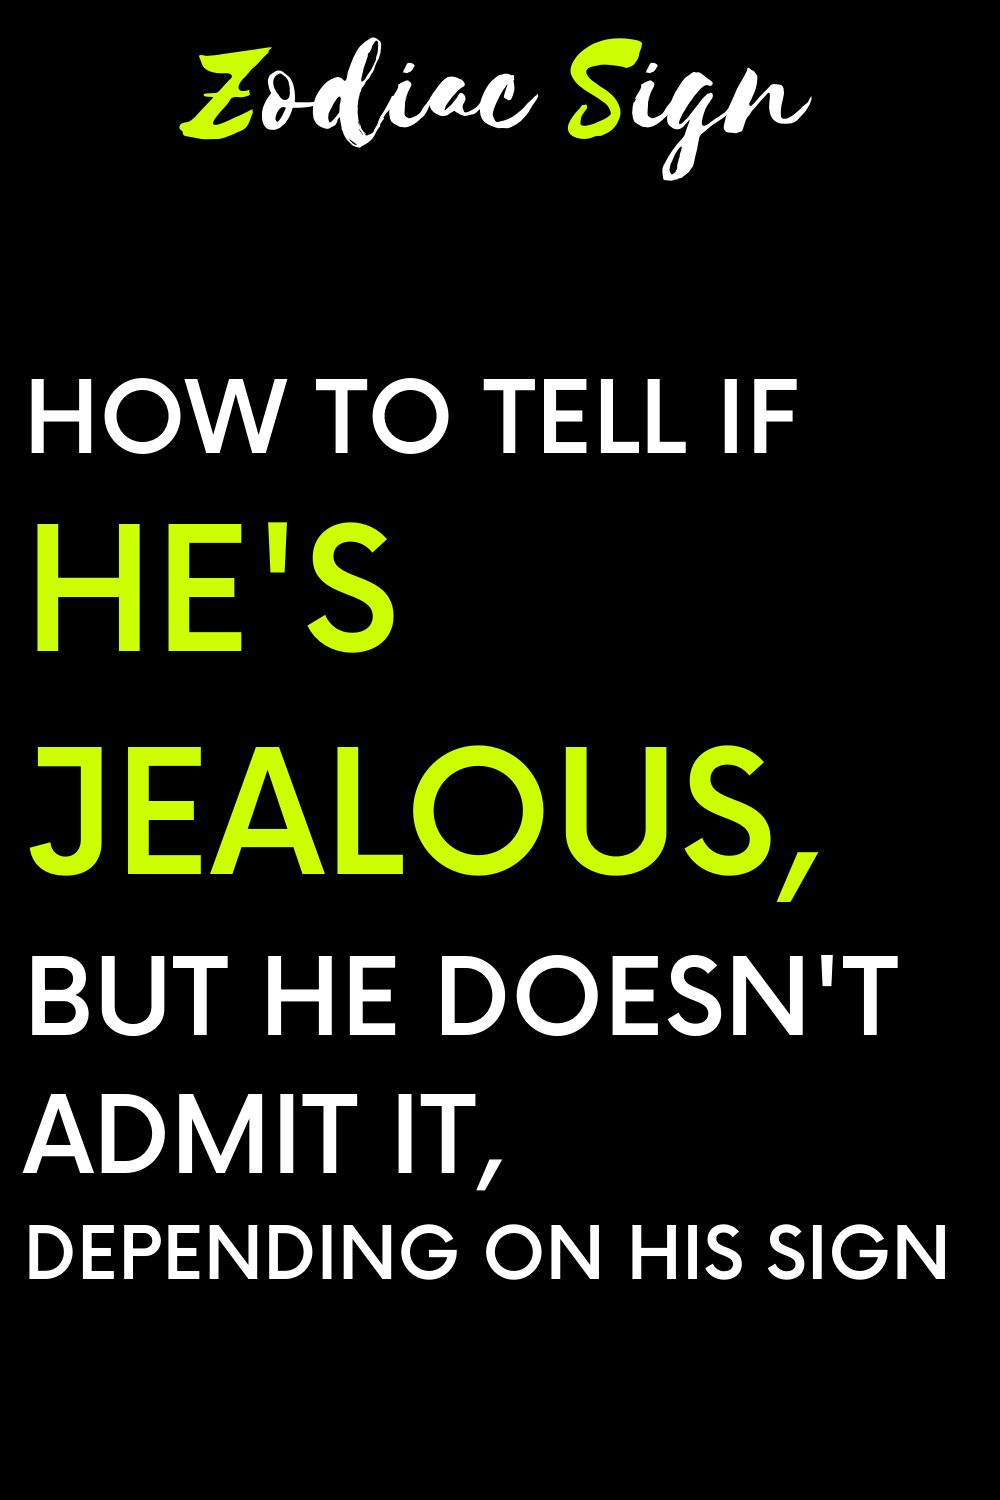 How to tell if he's jealous, but he doesn't admit it, depending on his sign